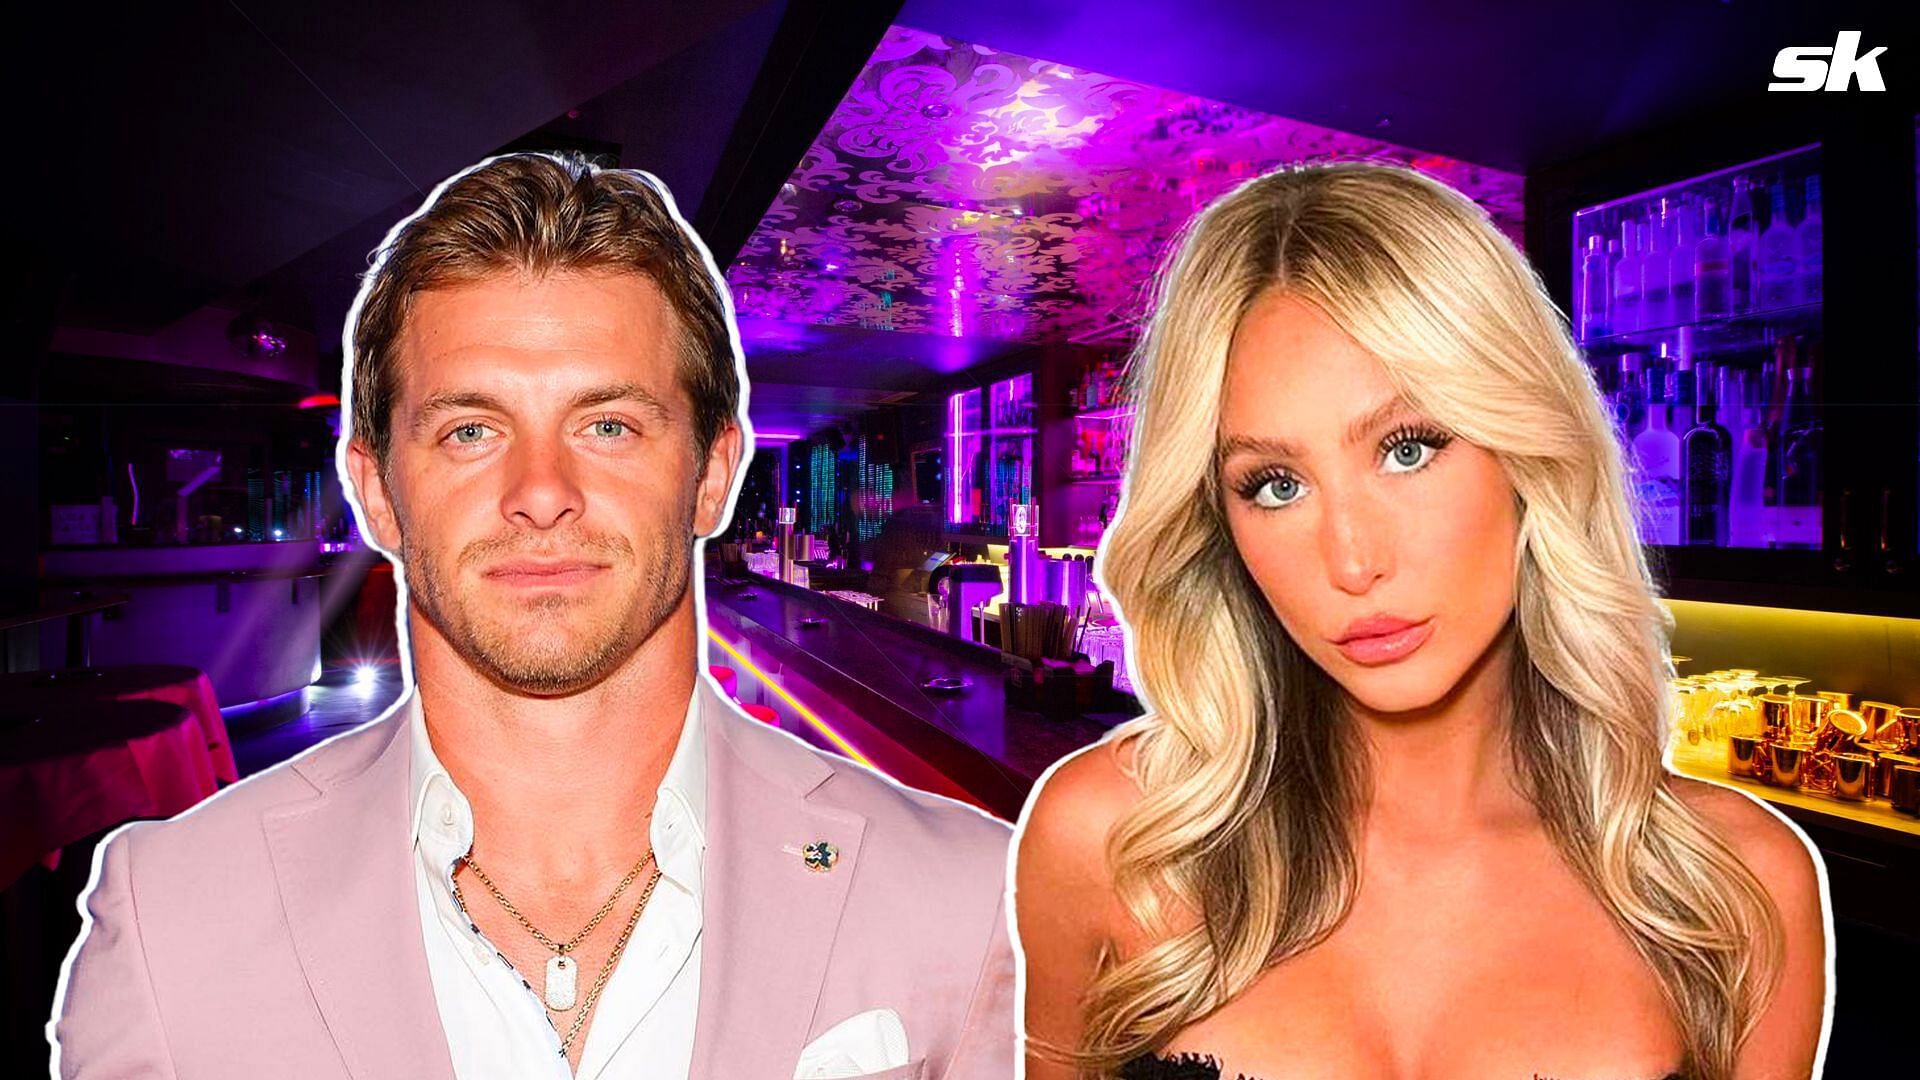 Are Alix Earle and Braxton Berrios still together?